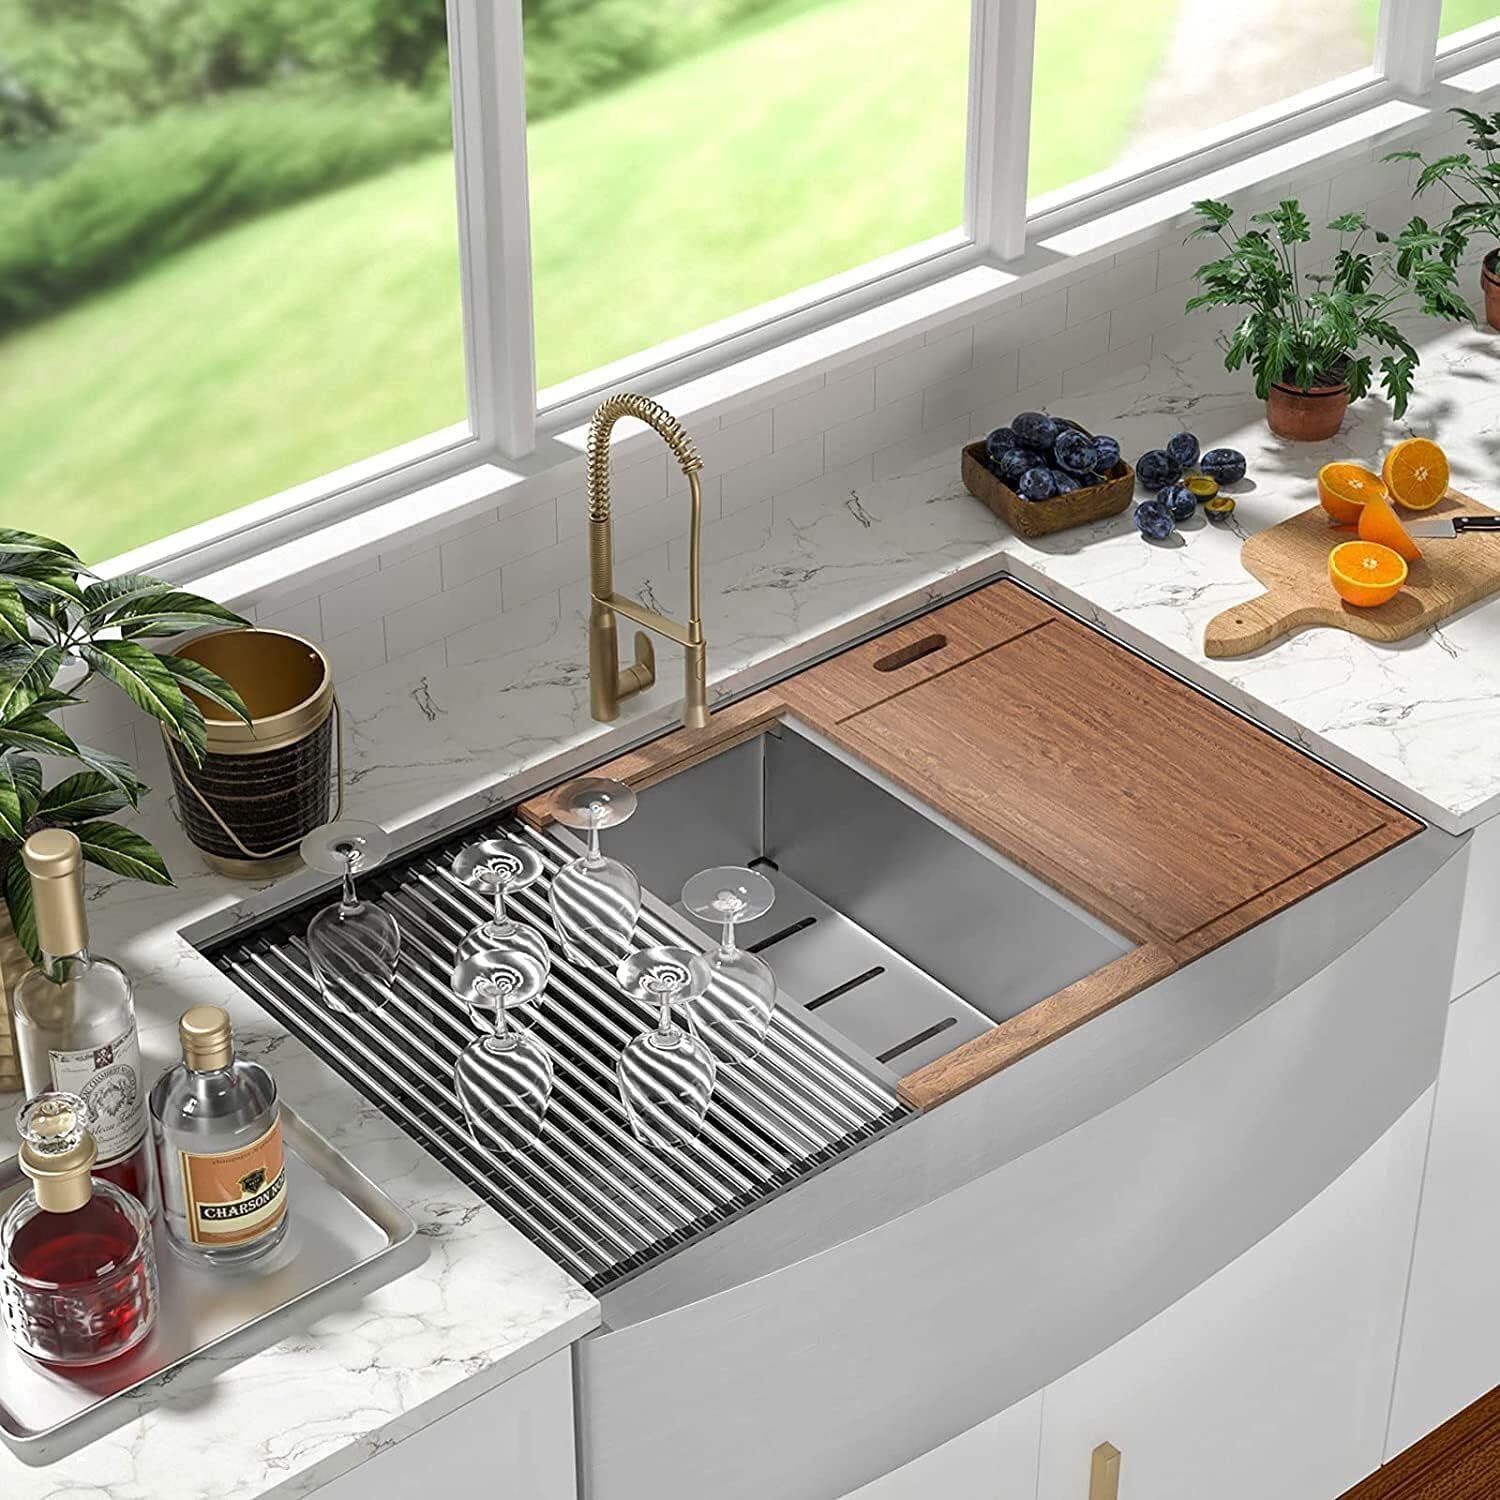 33" Stainless Steel Farmhouse Sink, Rust Resistant